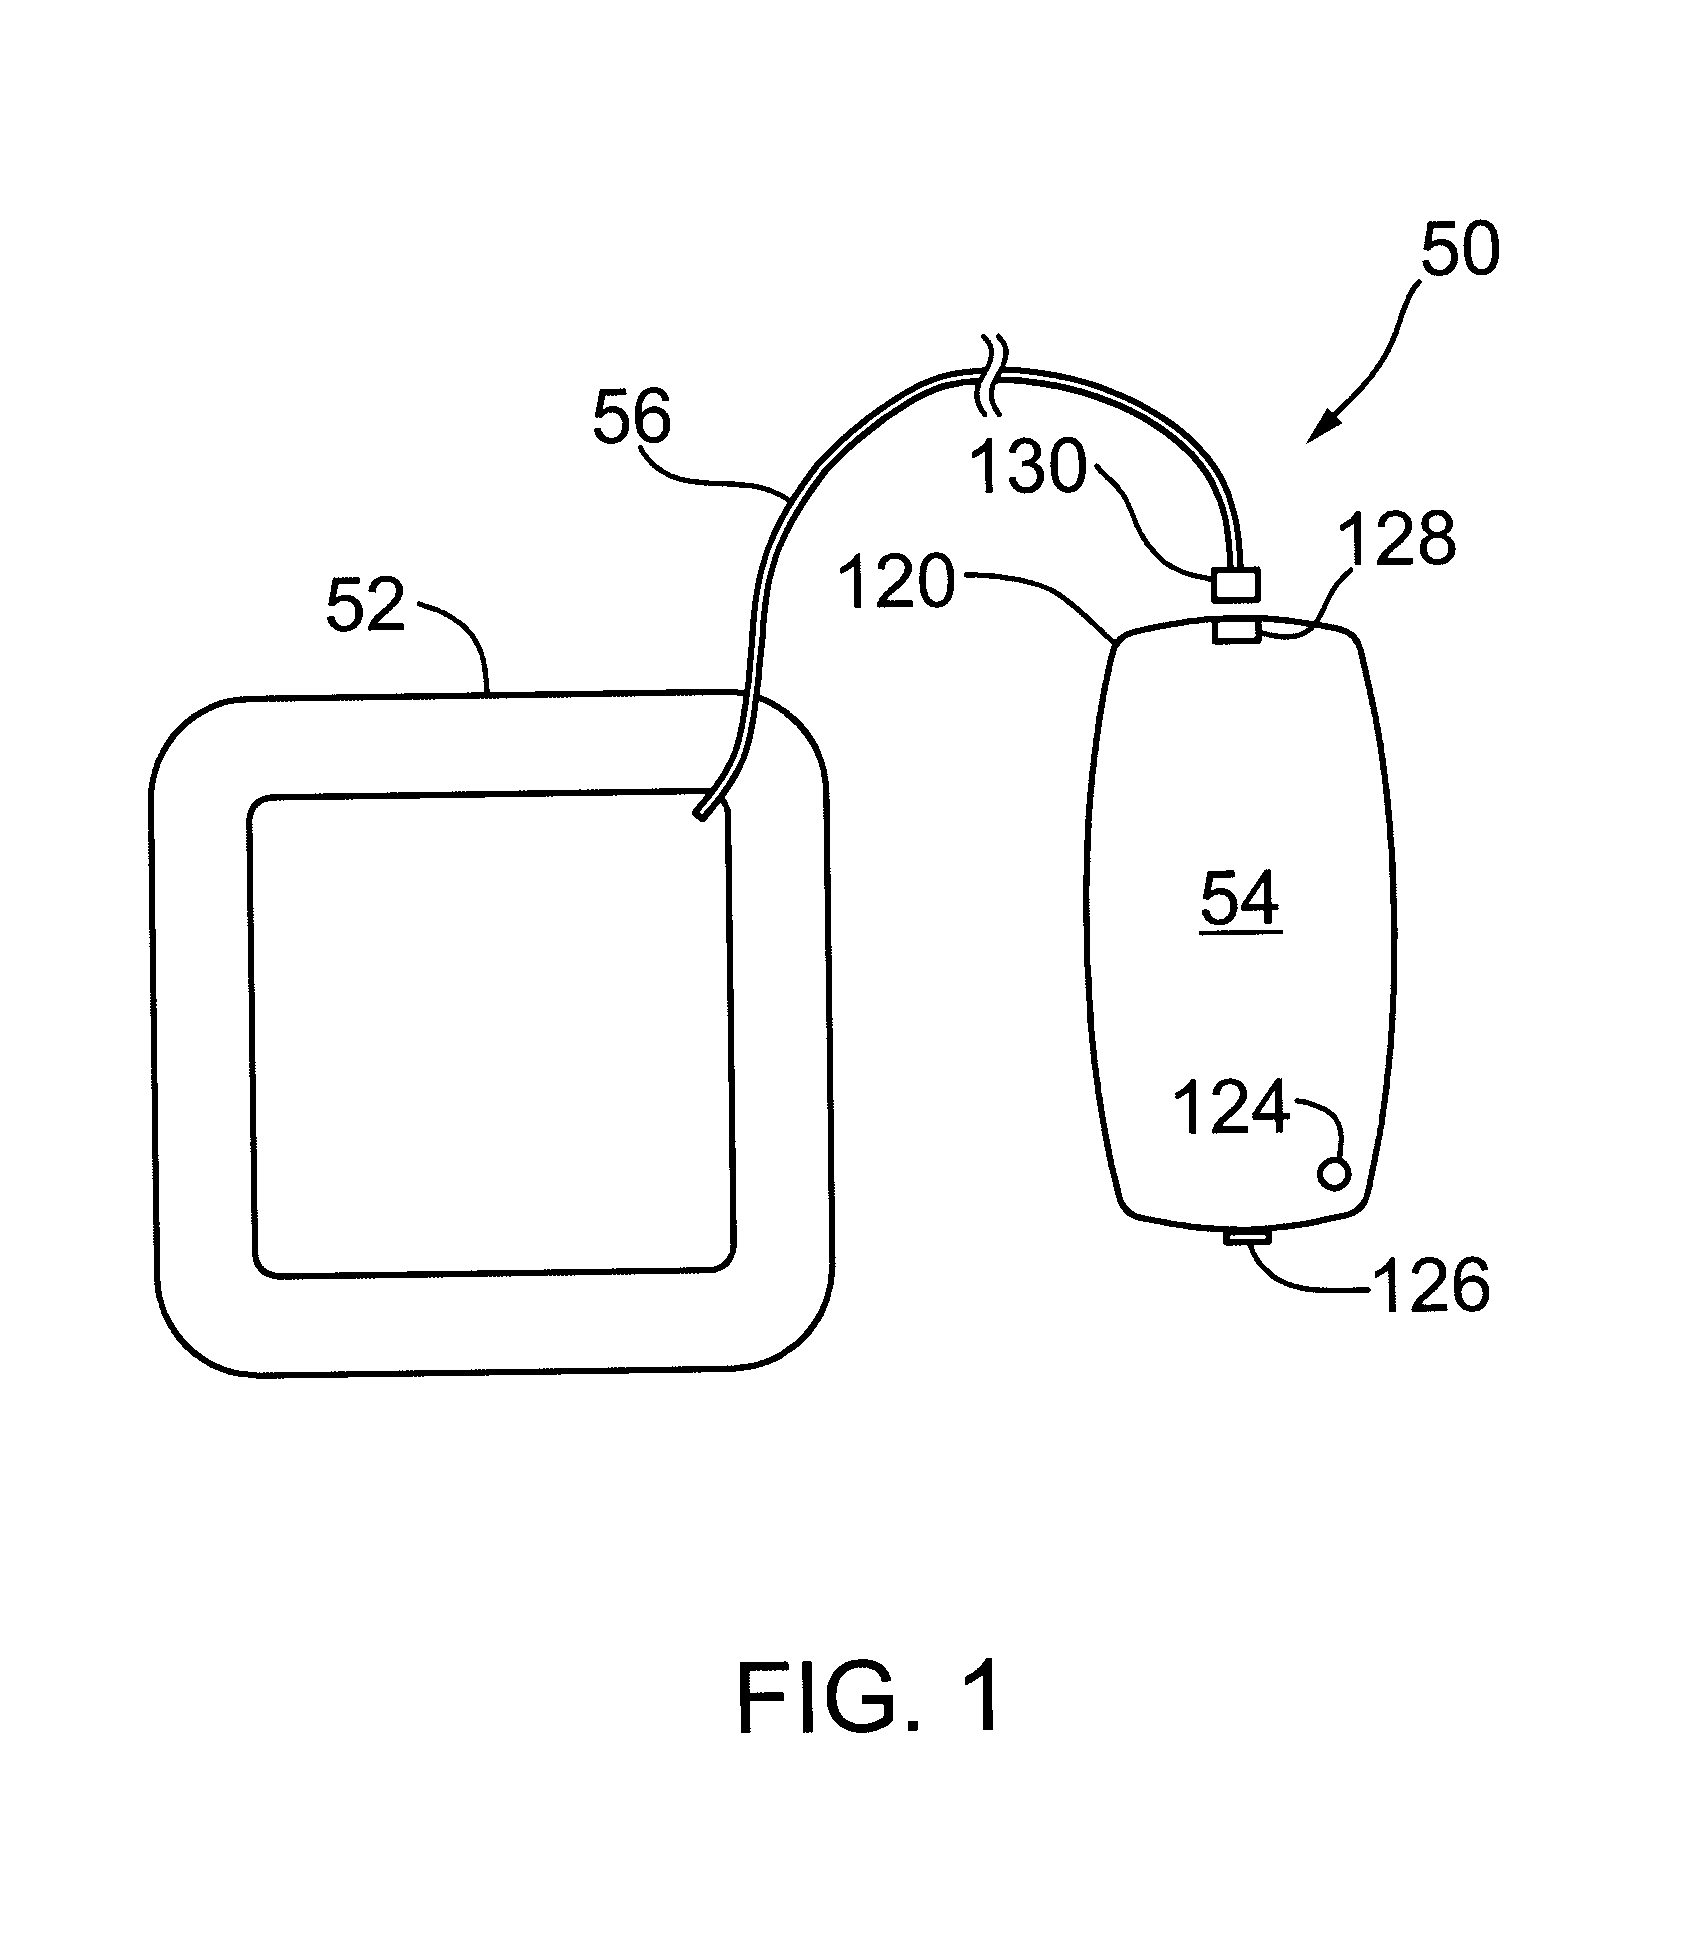 Phototherapy device for illuminating the periphery of a wound and phototherapy system incorporating the same